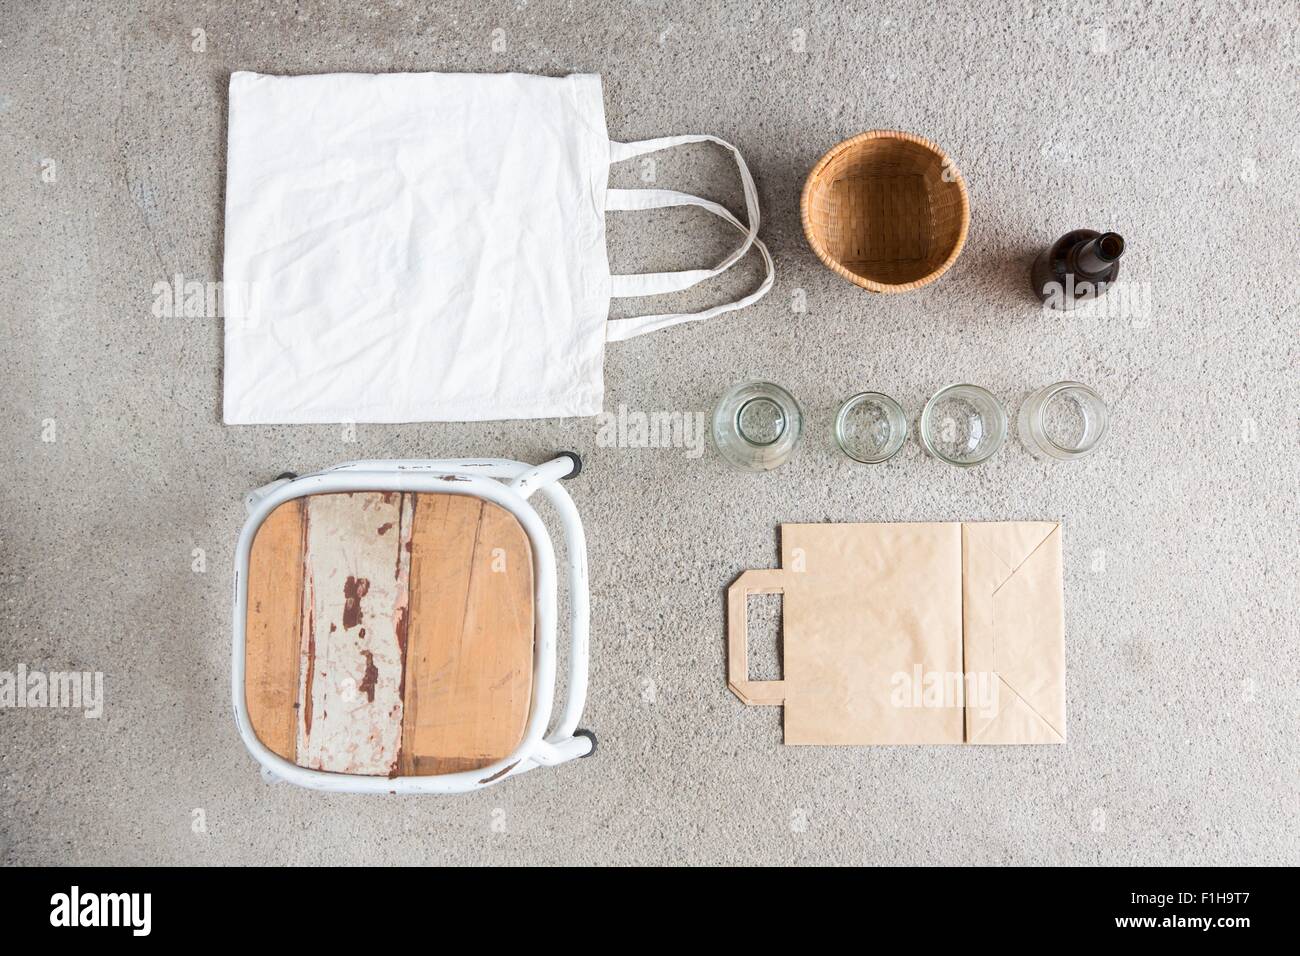 Overhead still life of stool, reusable shopping bag and recyclable paper and bottles Stock Photo